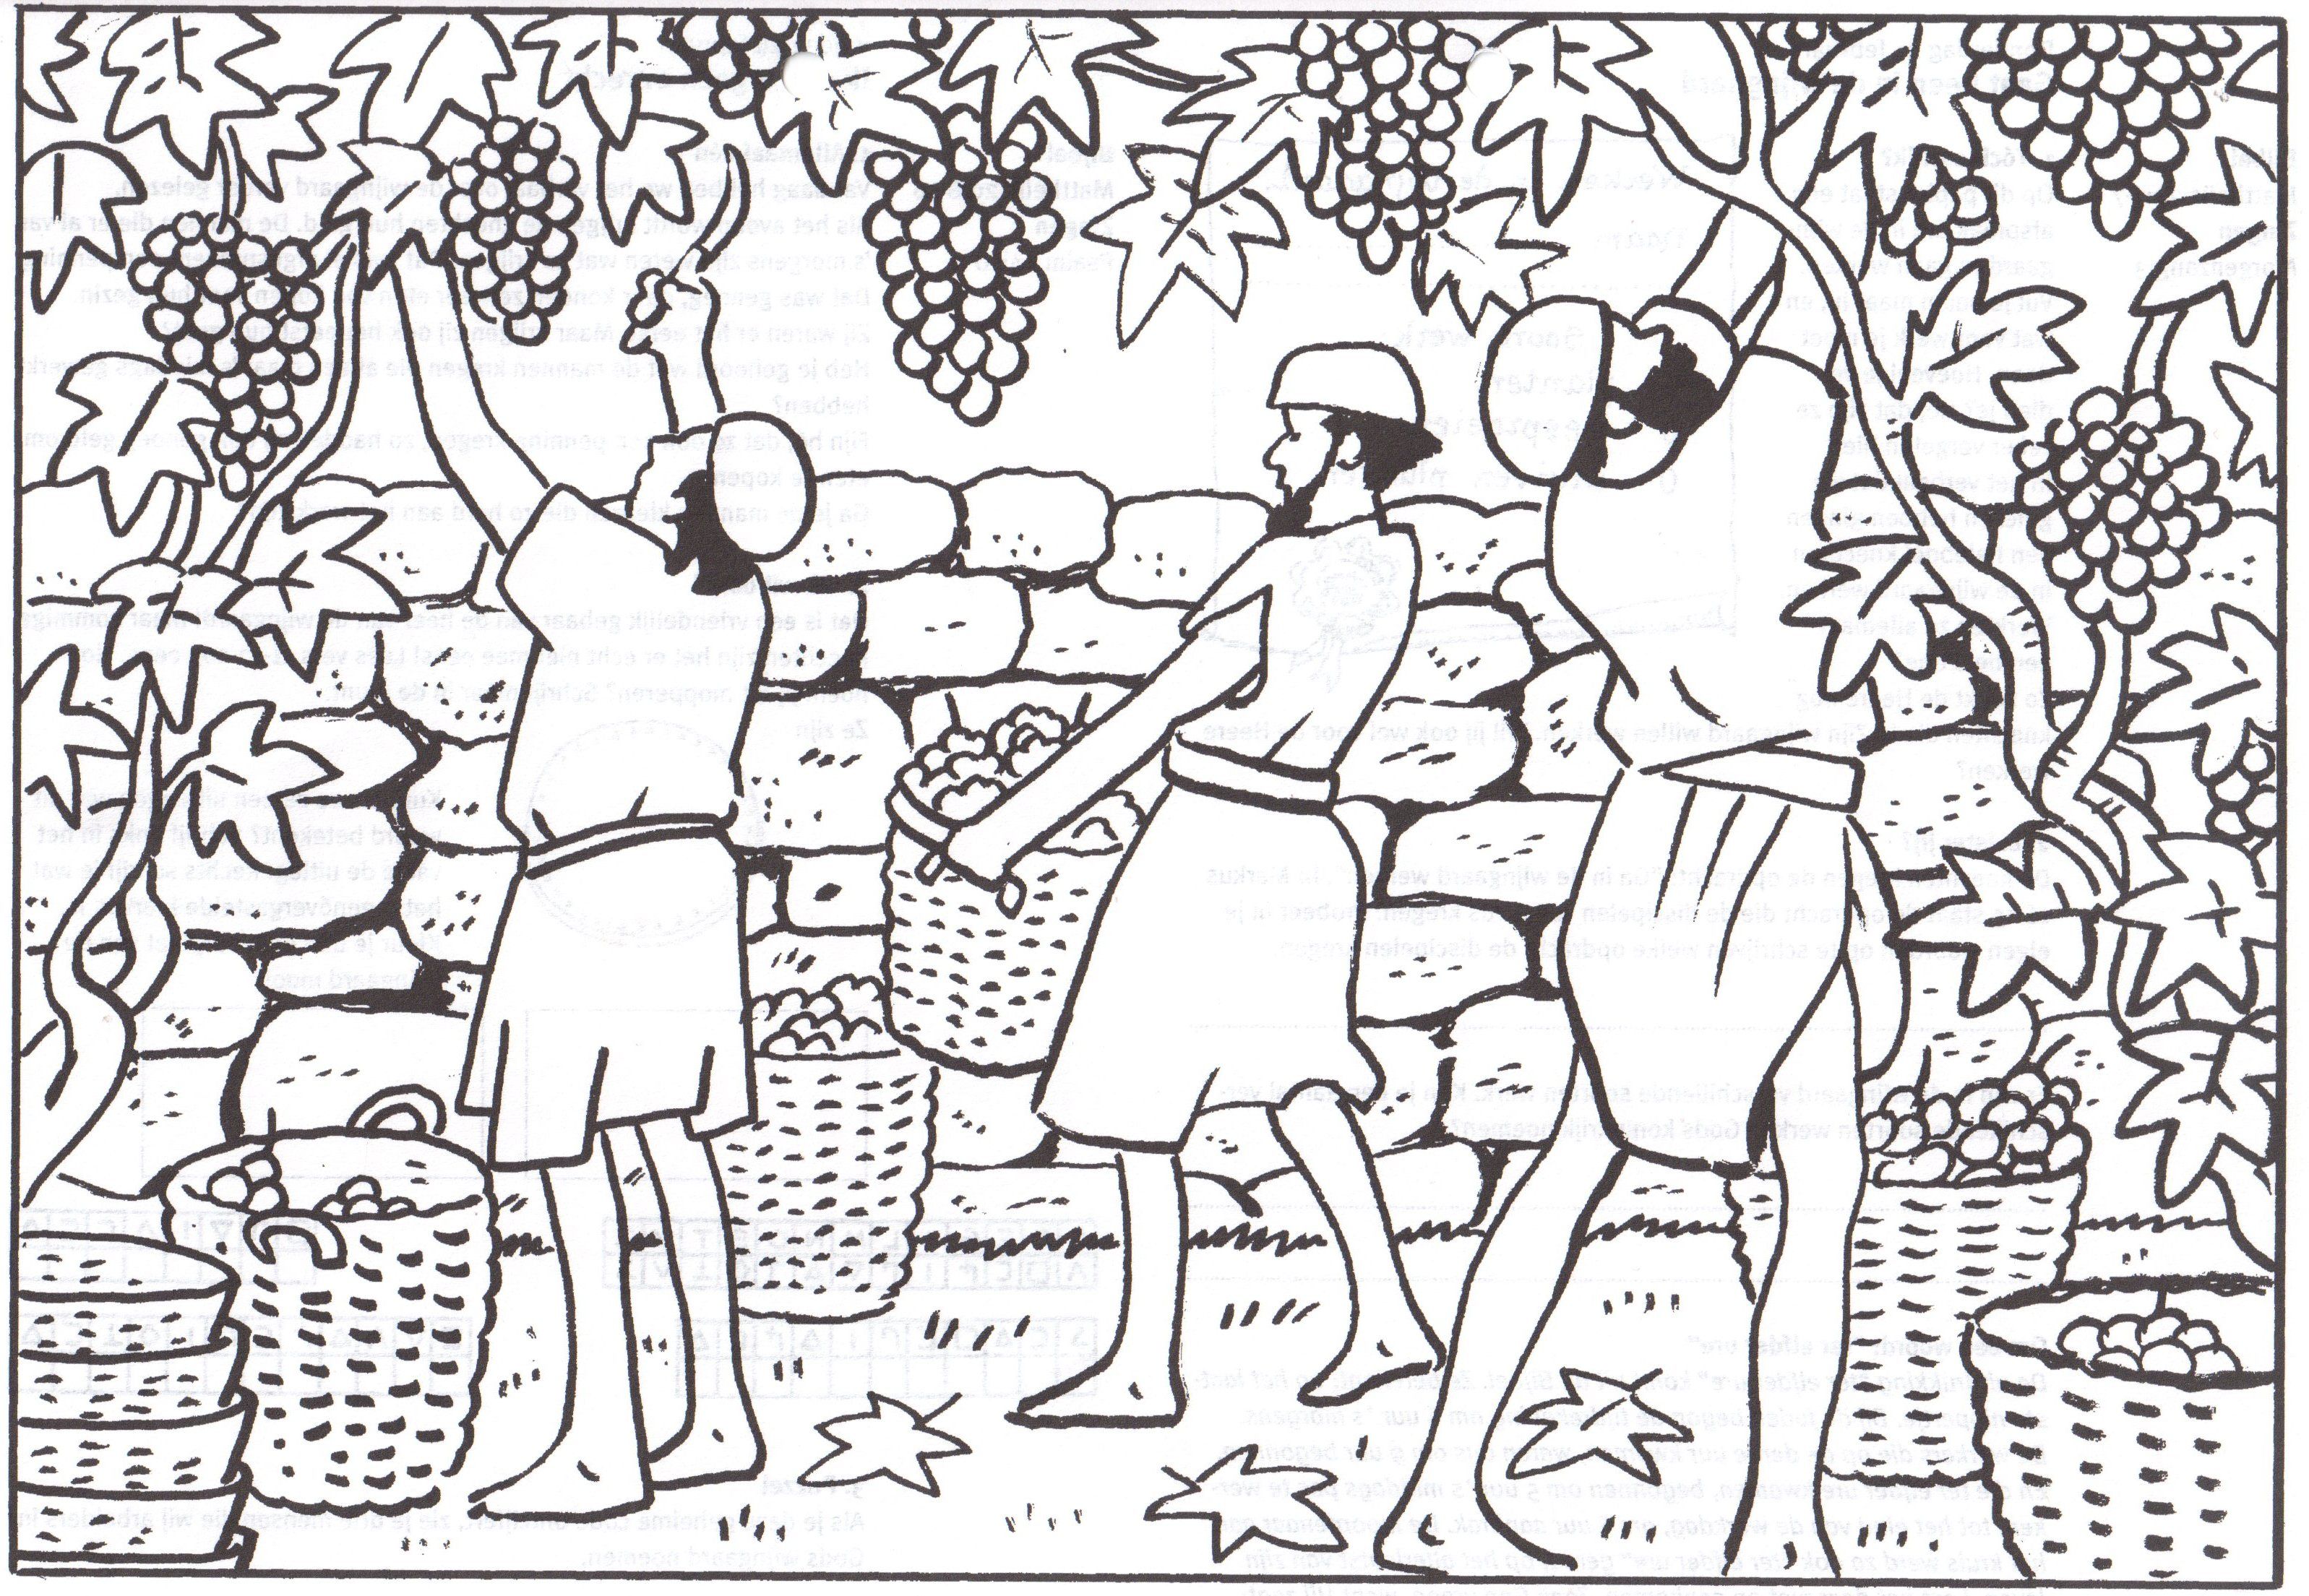 The Workers in the Vineyard - Bible ...